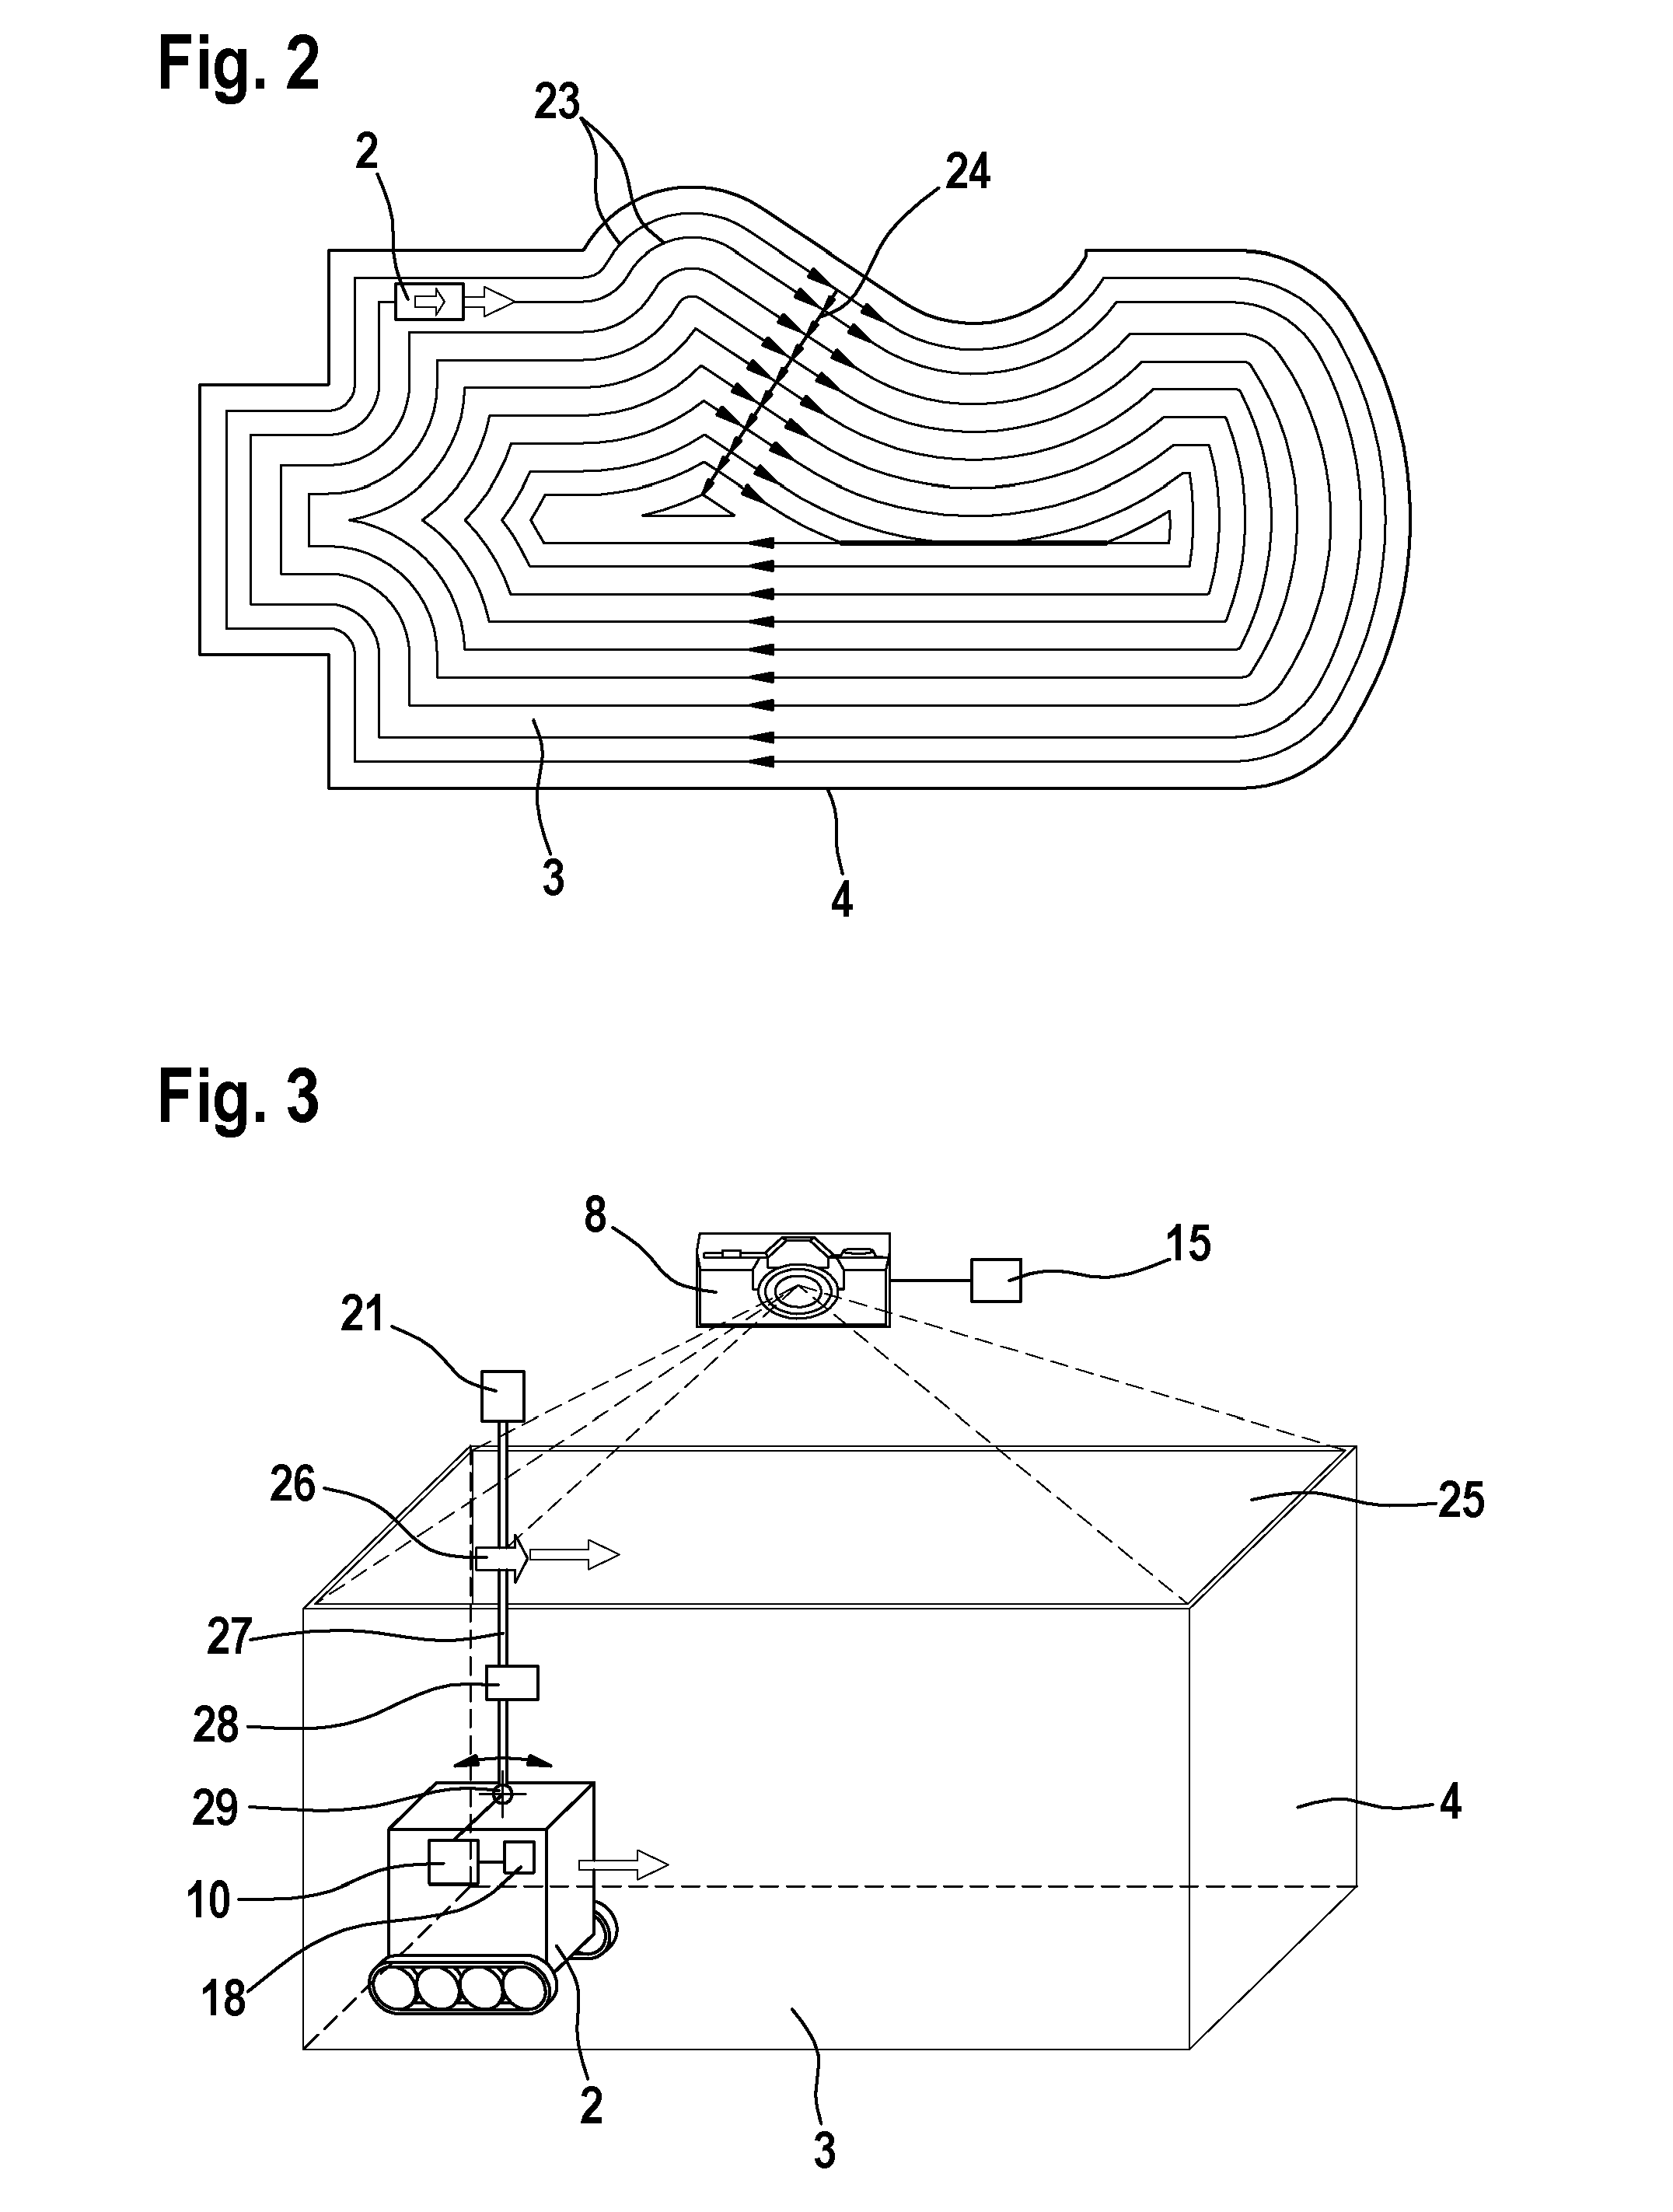 Activation system for a robotic vehicle